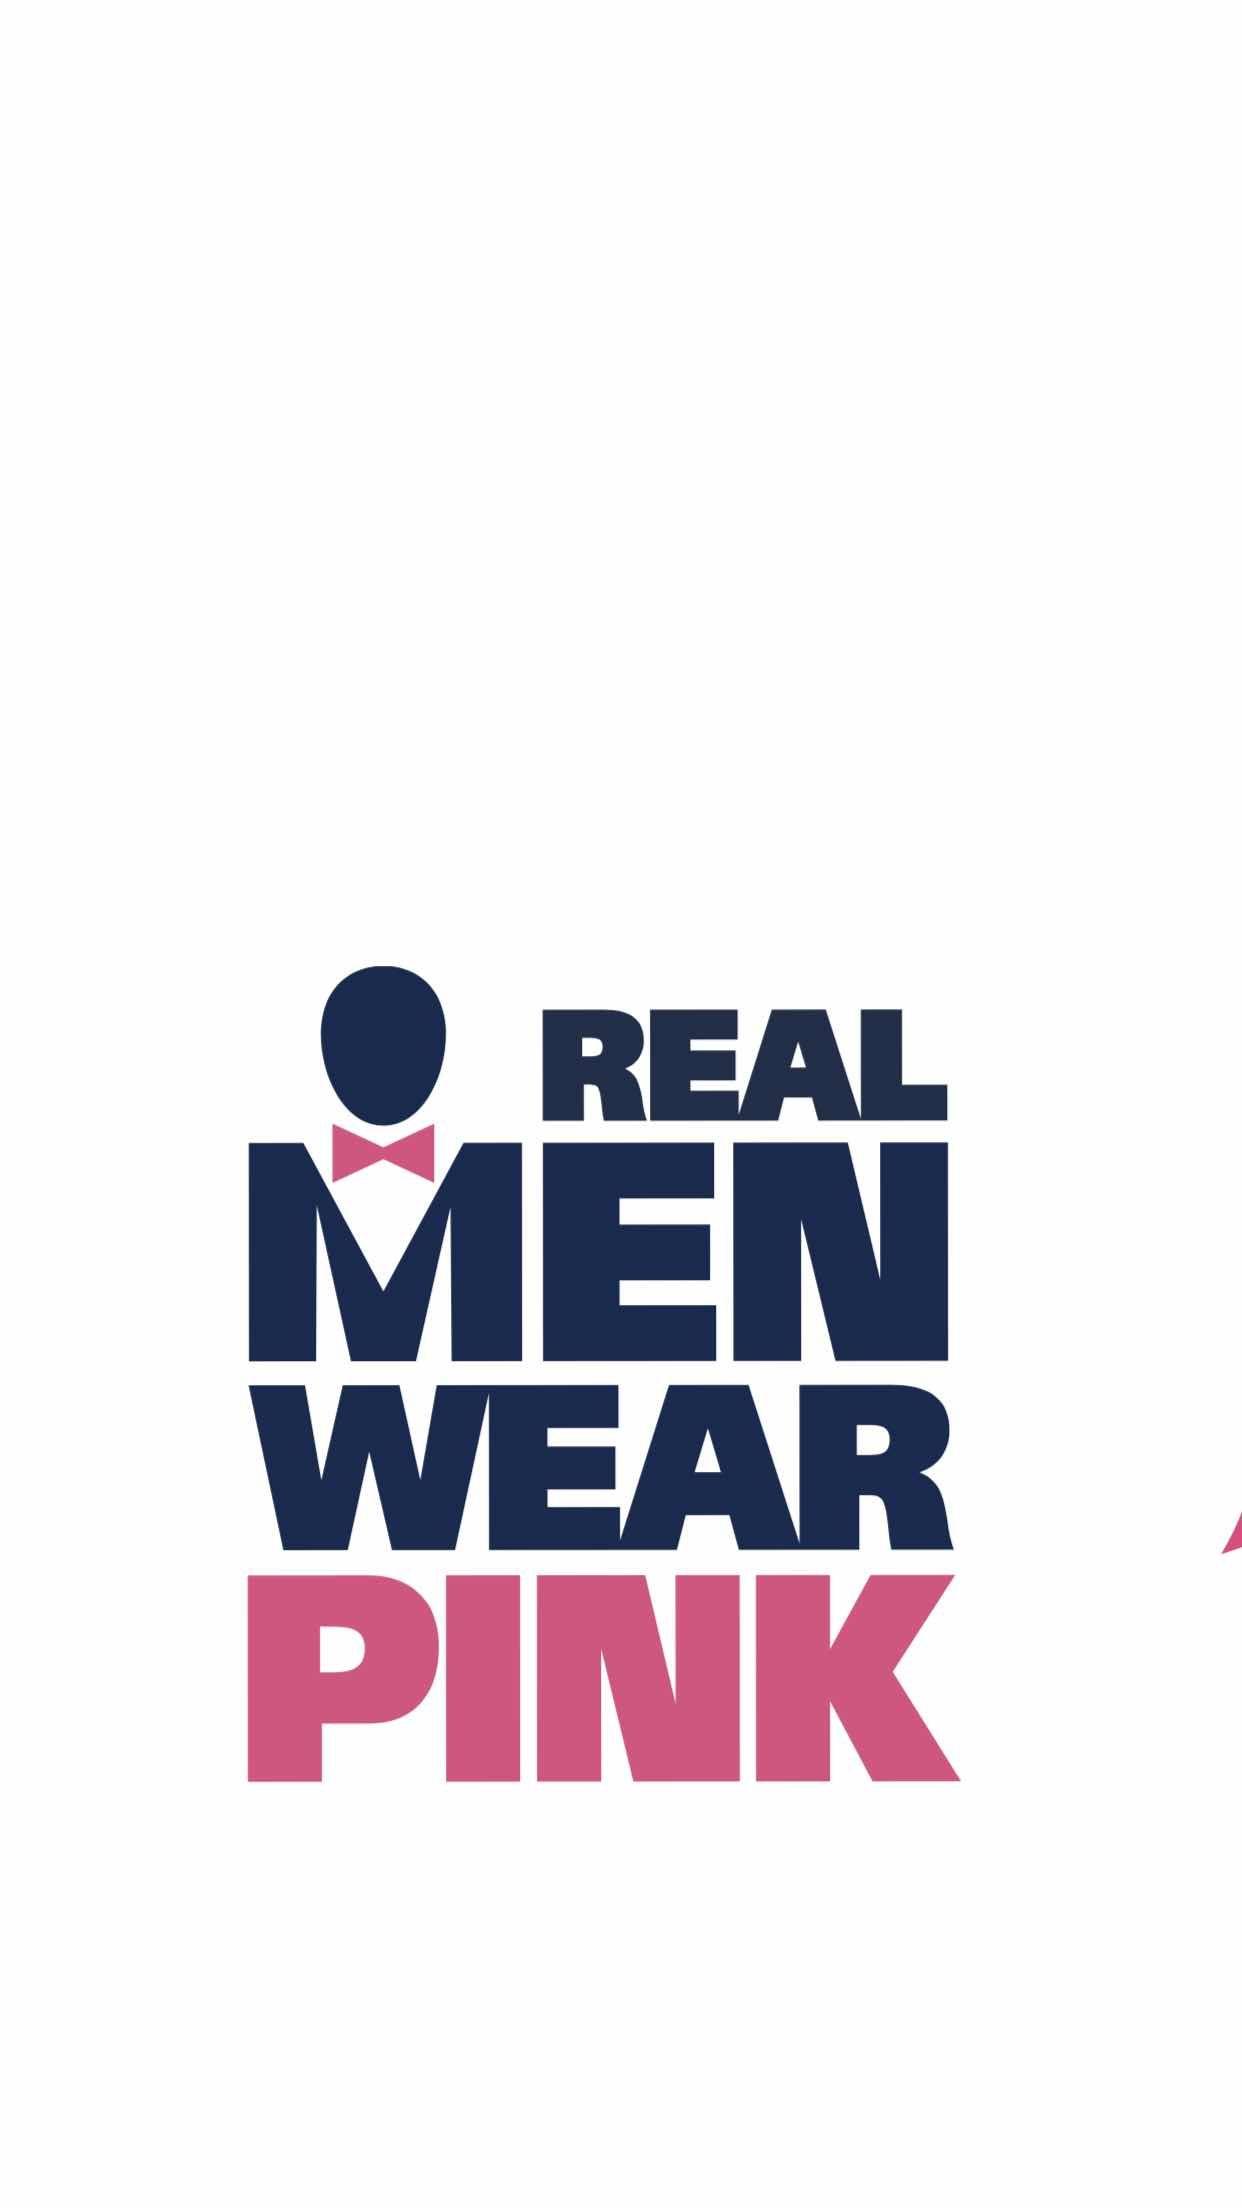 Wear Pink Logo - Real Men Wear Pink to the Point